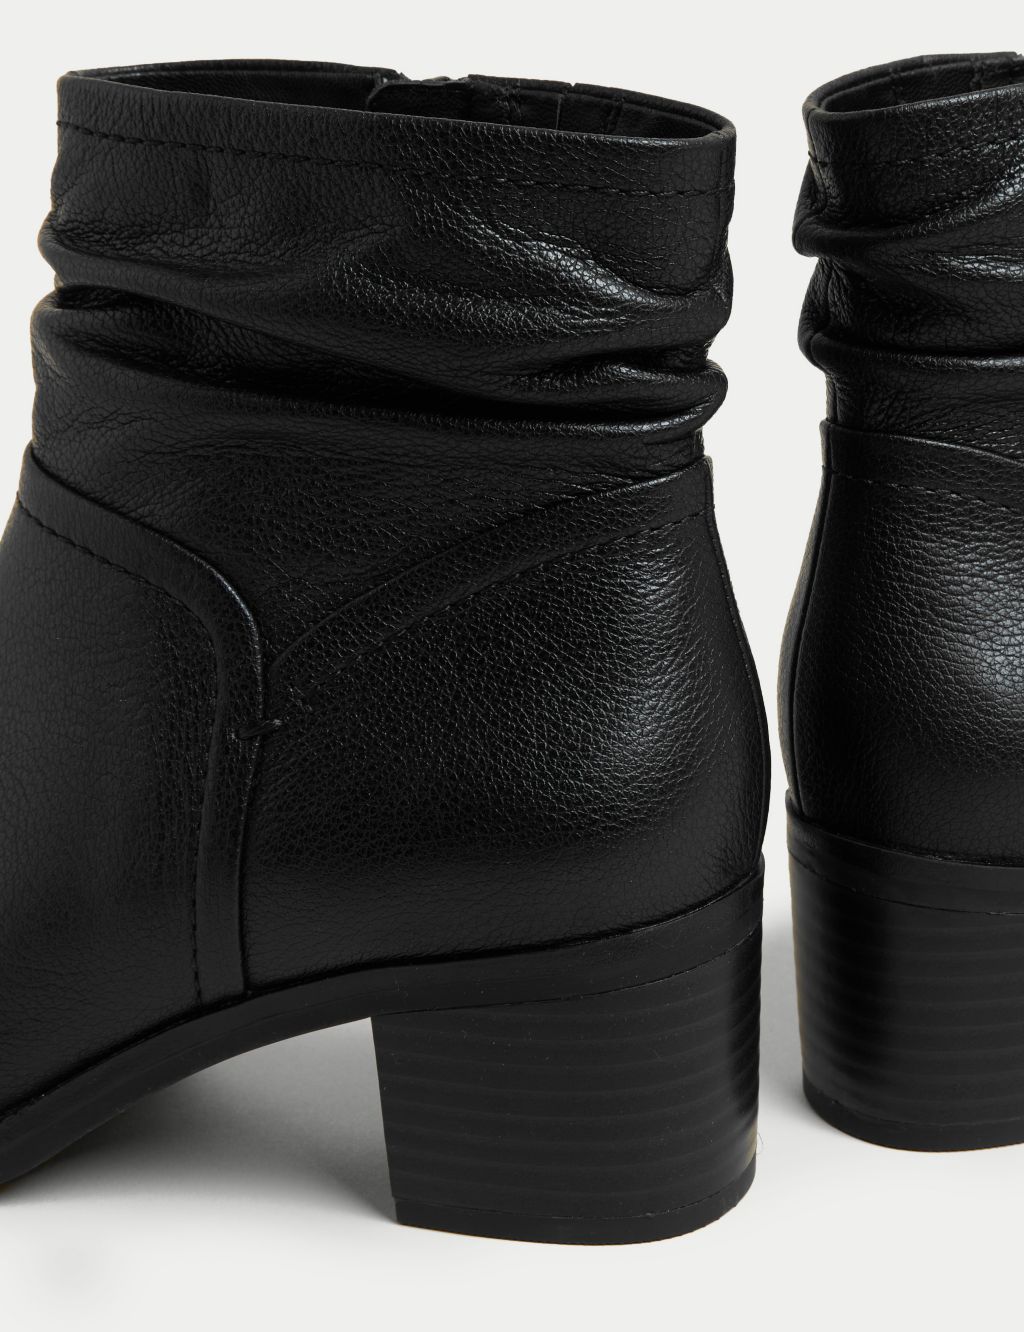 Wide Fit Leather Block Heel Ankle Boots image 2